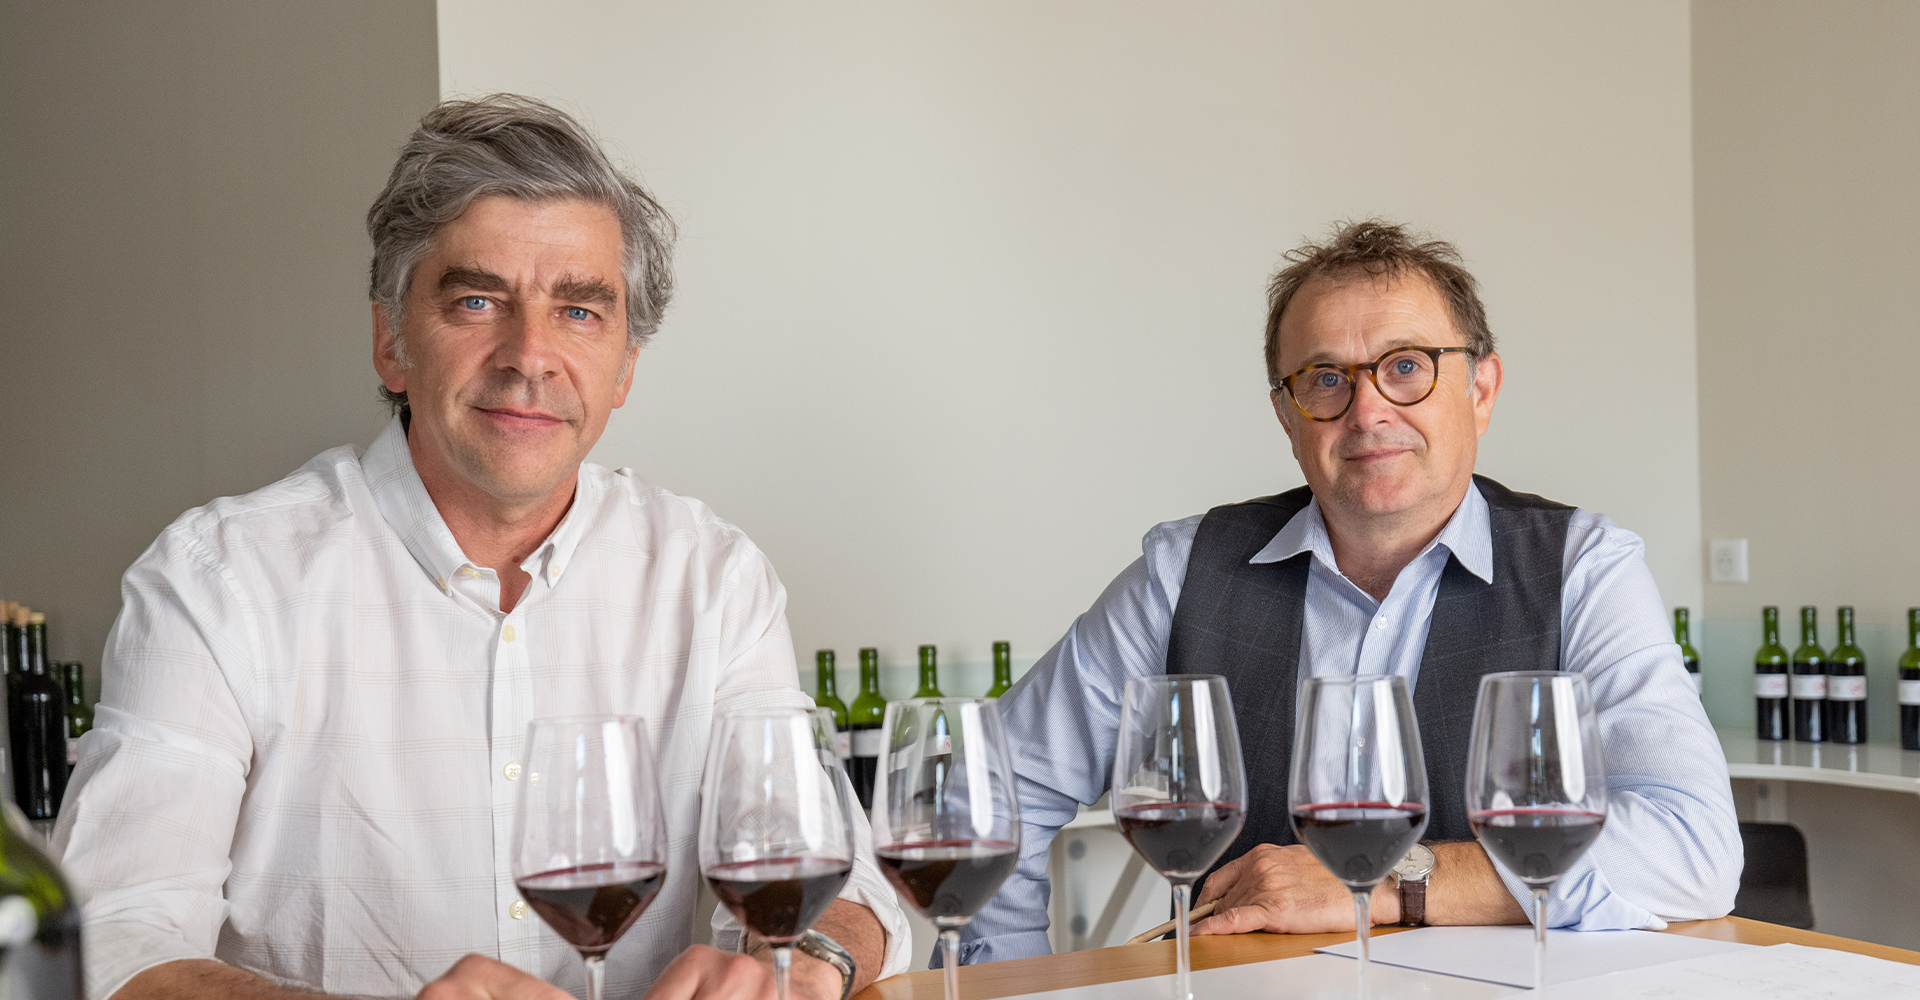 The Guardians of the Terroir